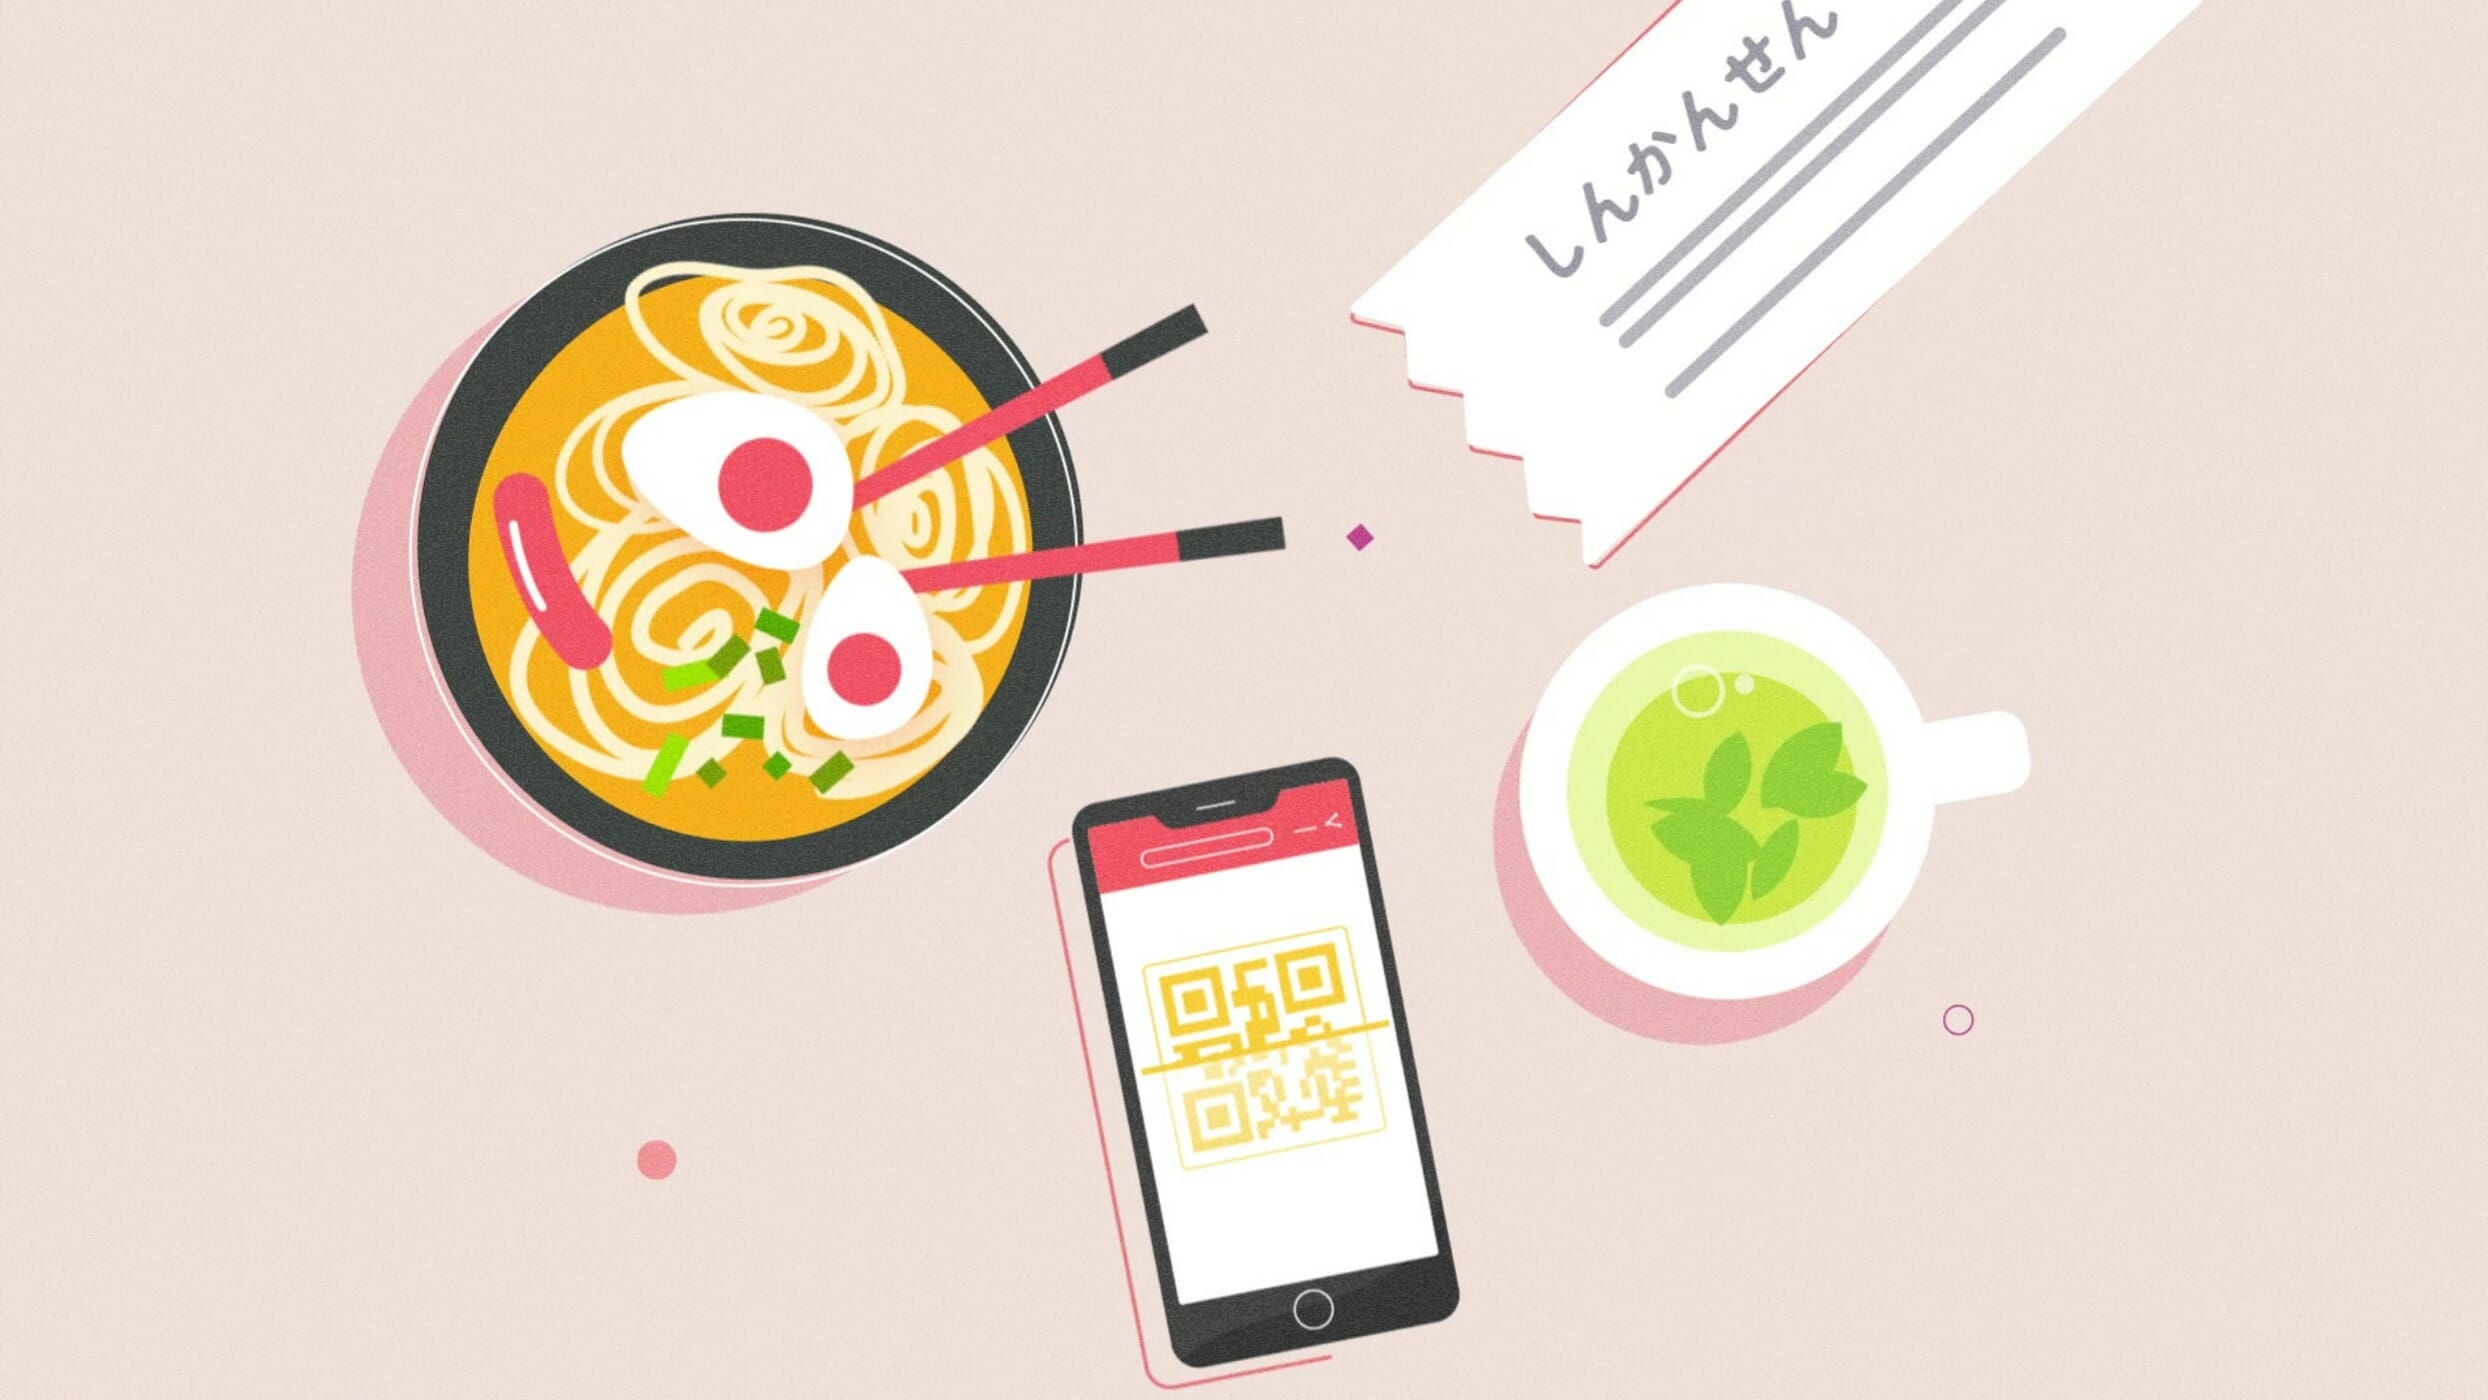 bowl of ramen, train ticket, cup of green tea and a phone with a QR code on it